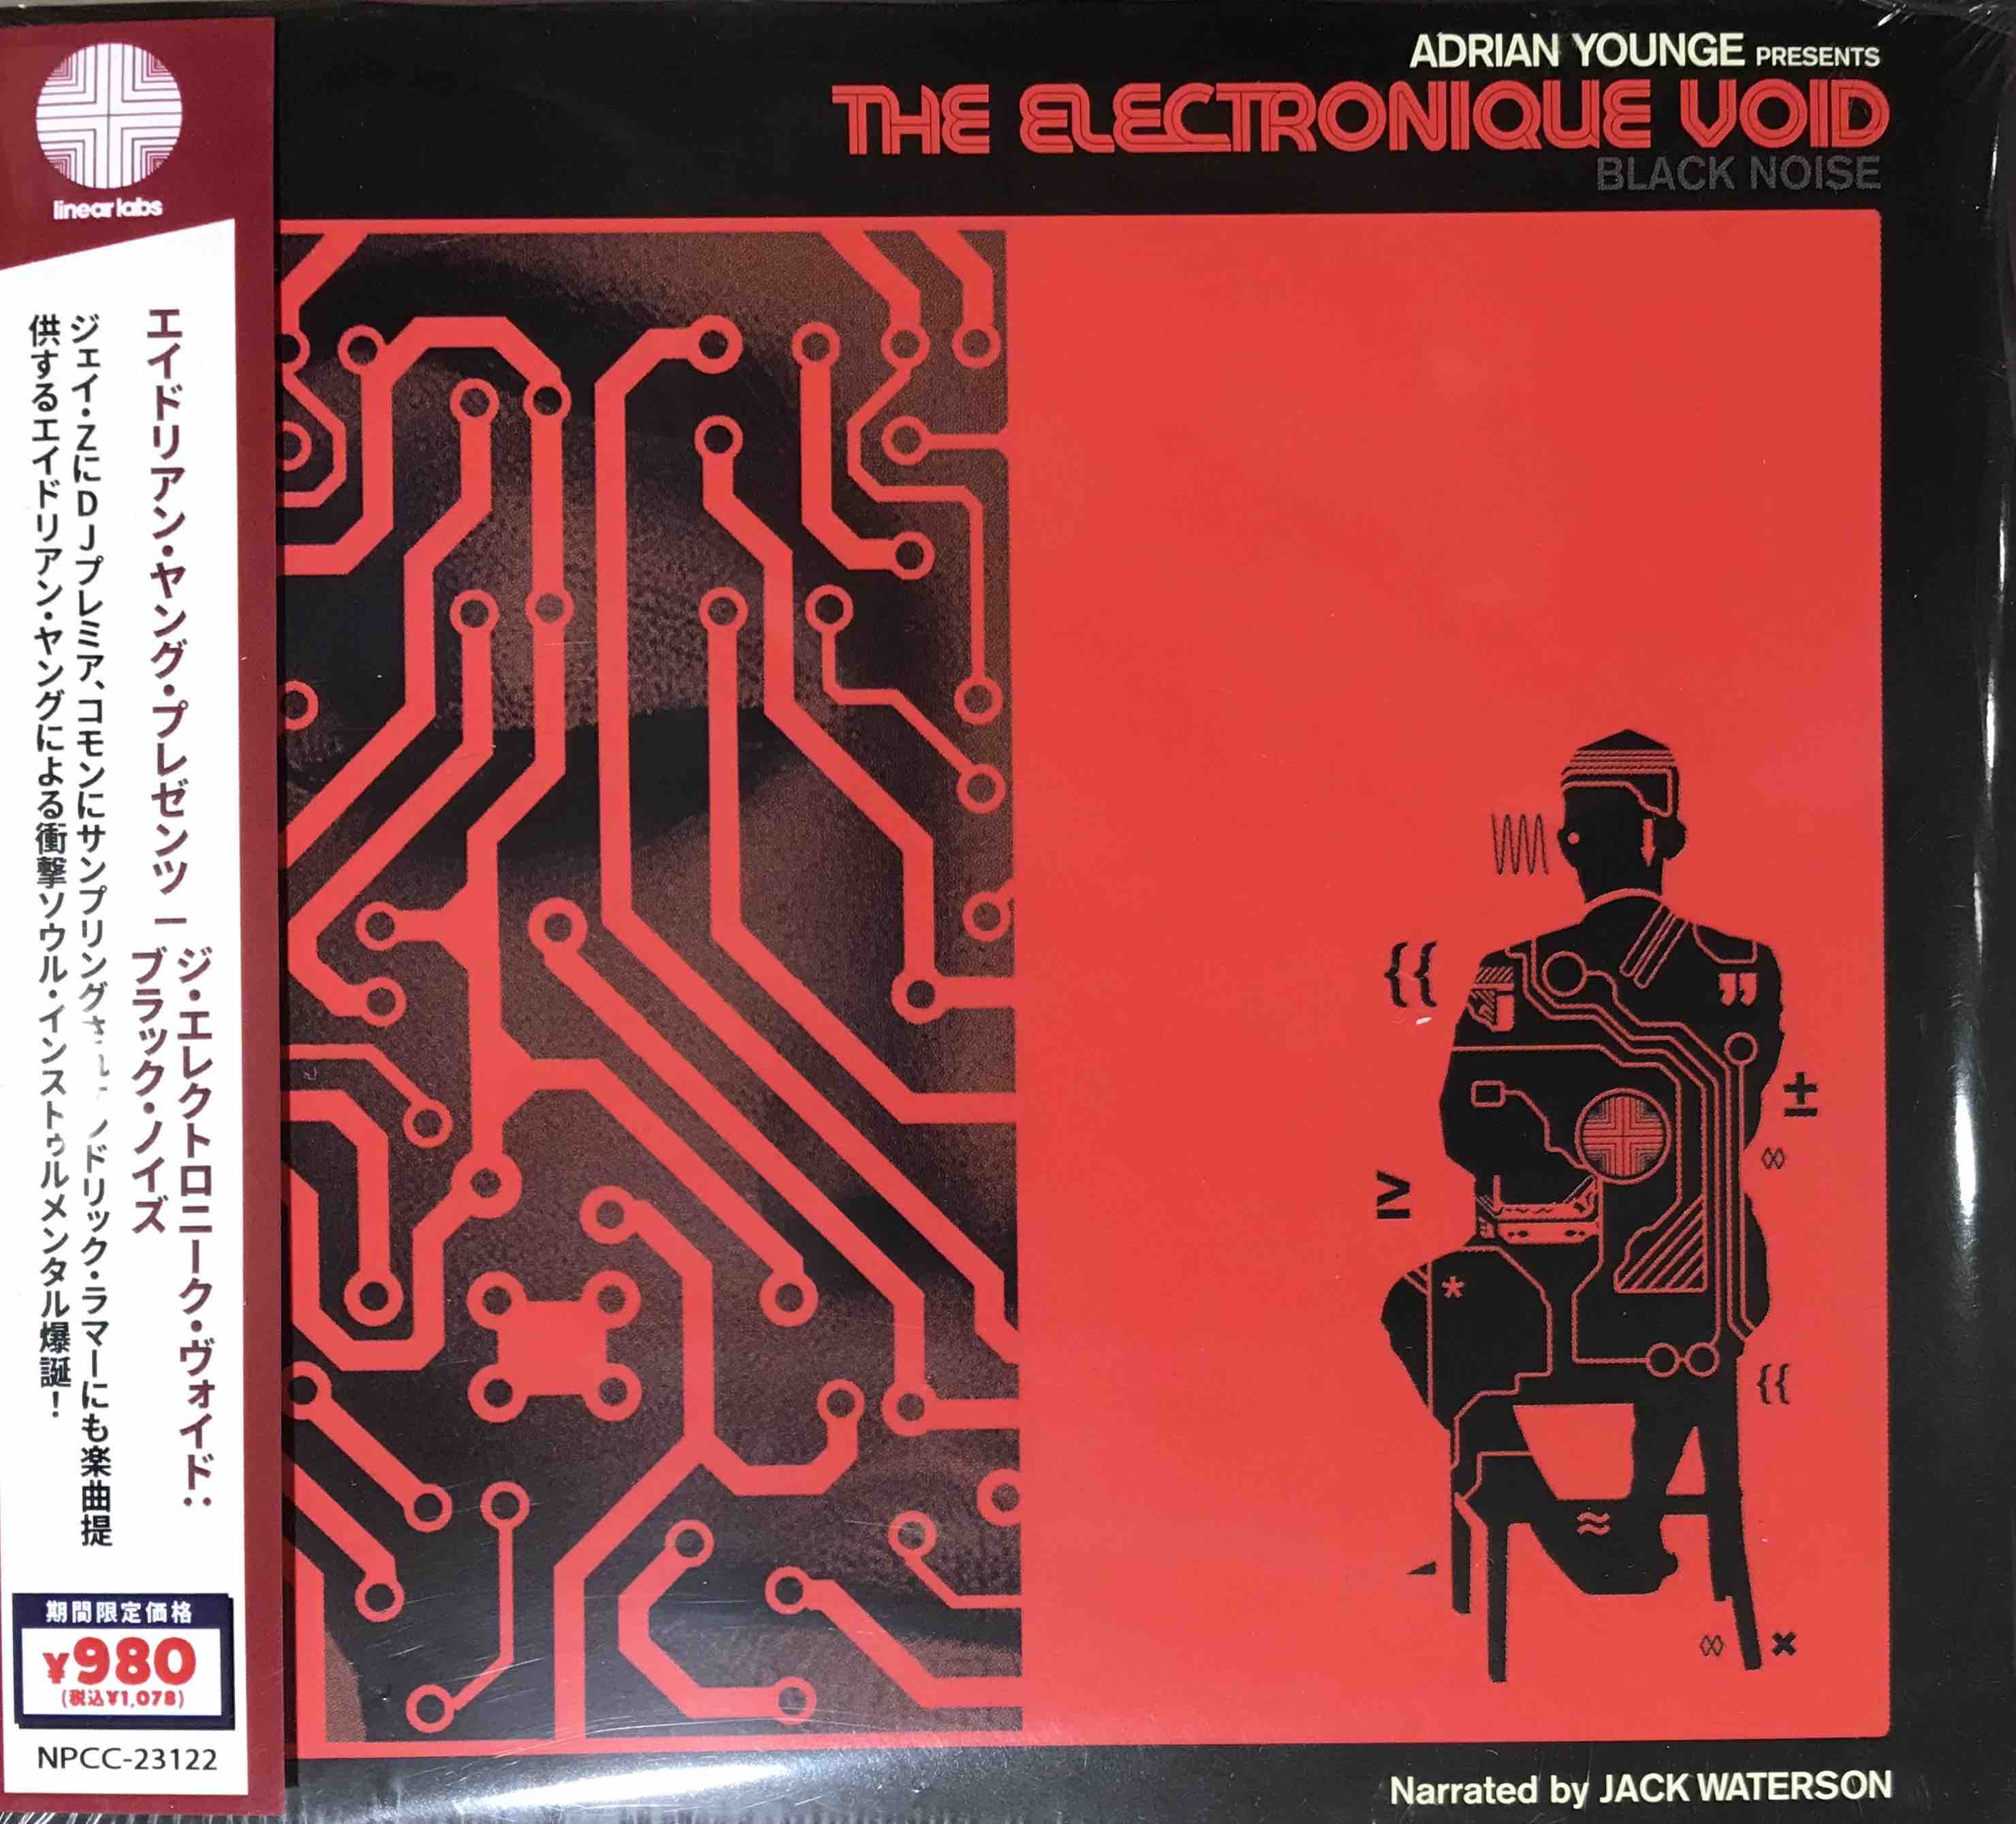 Adrian Younge ‎– The Electronique Void (Black Noise)